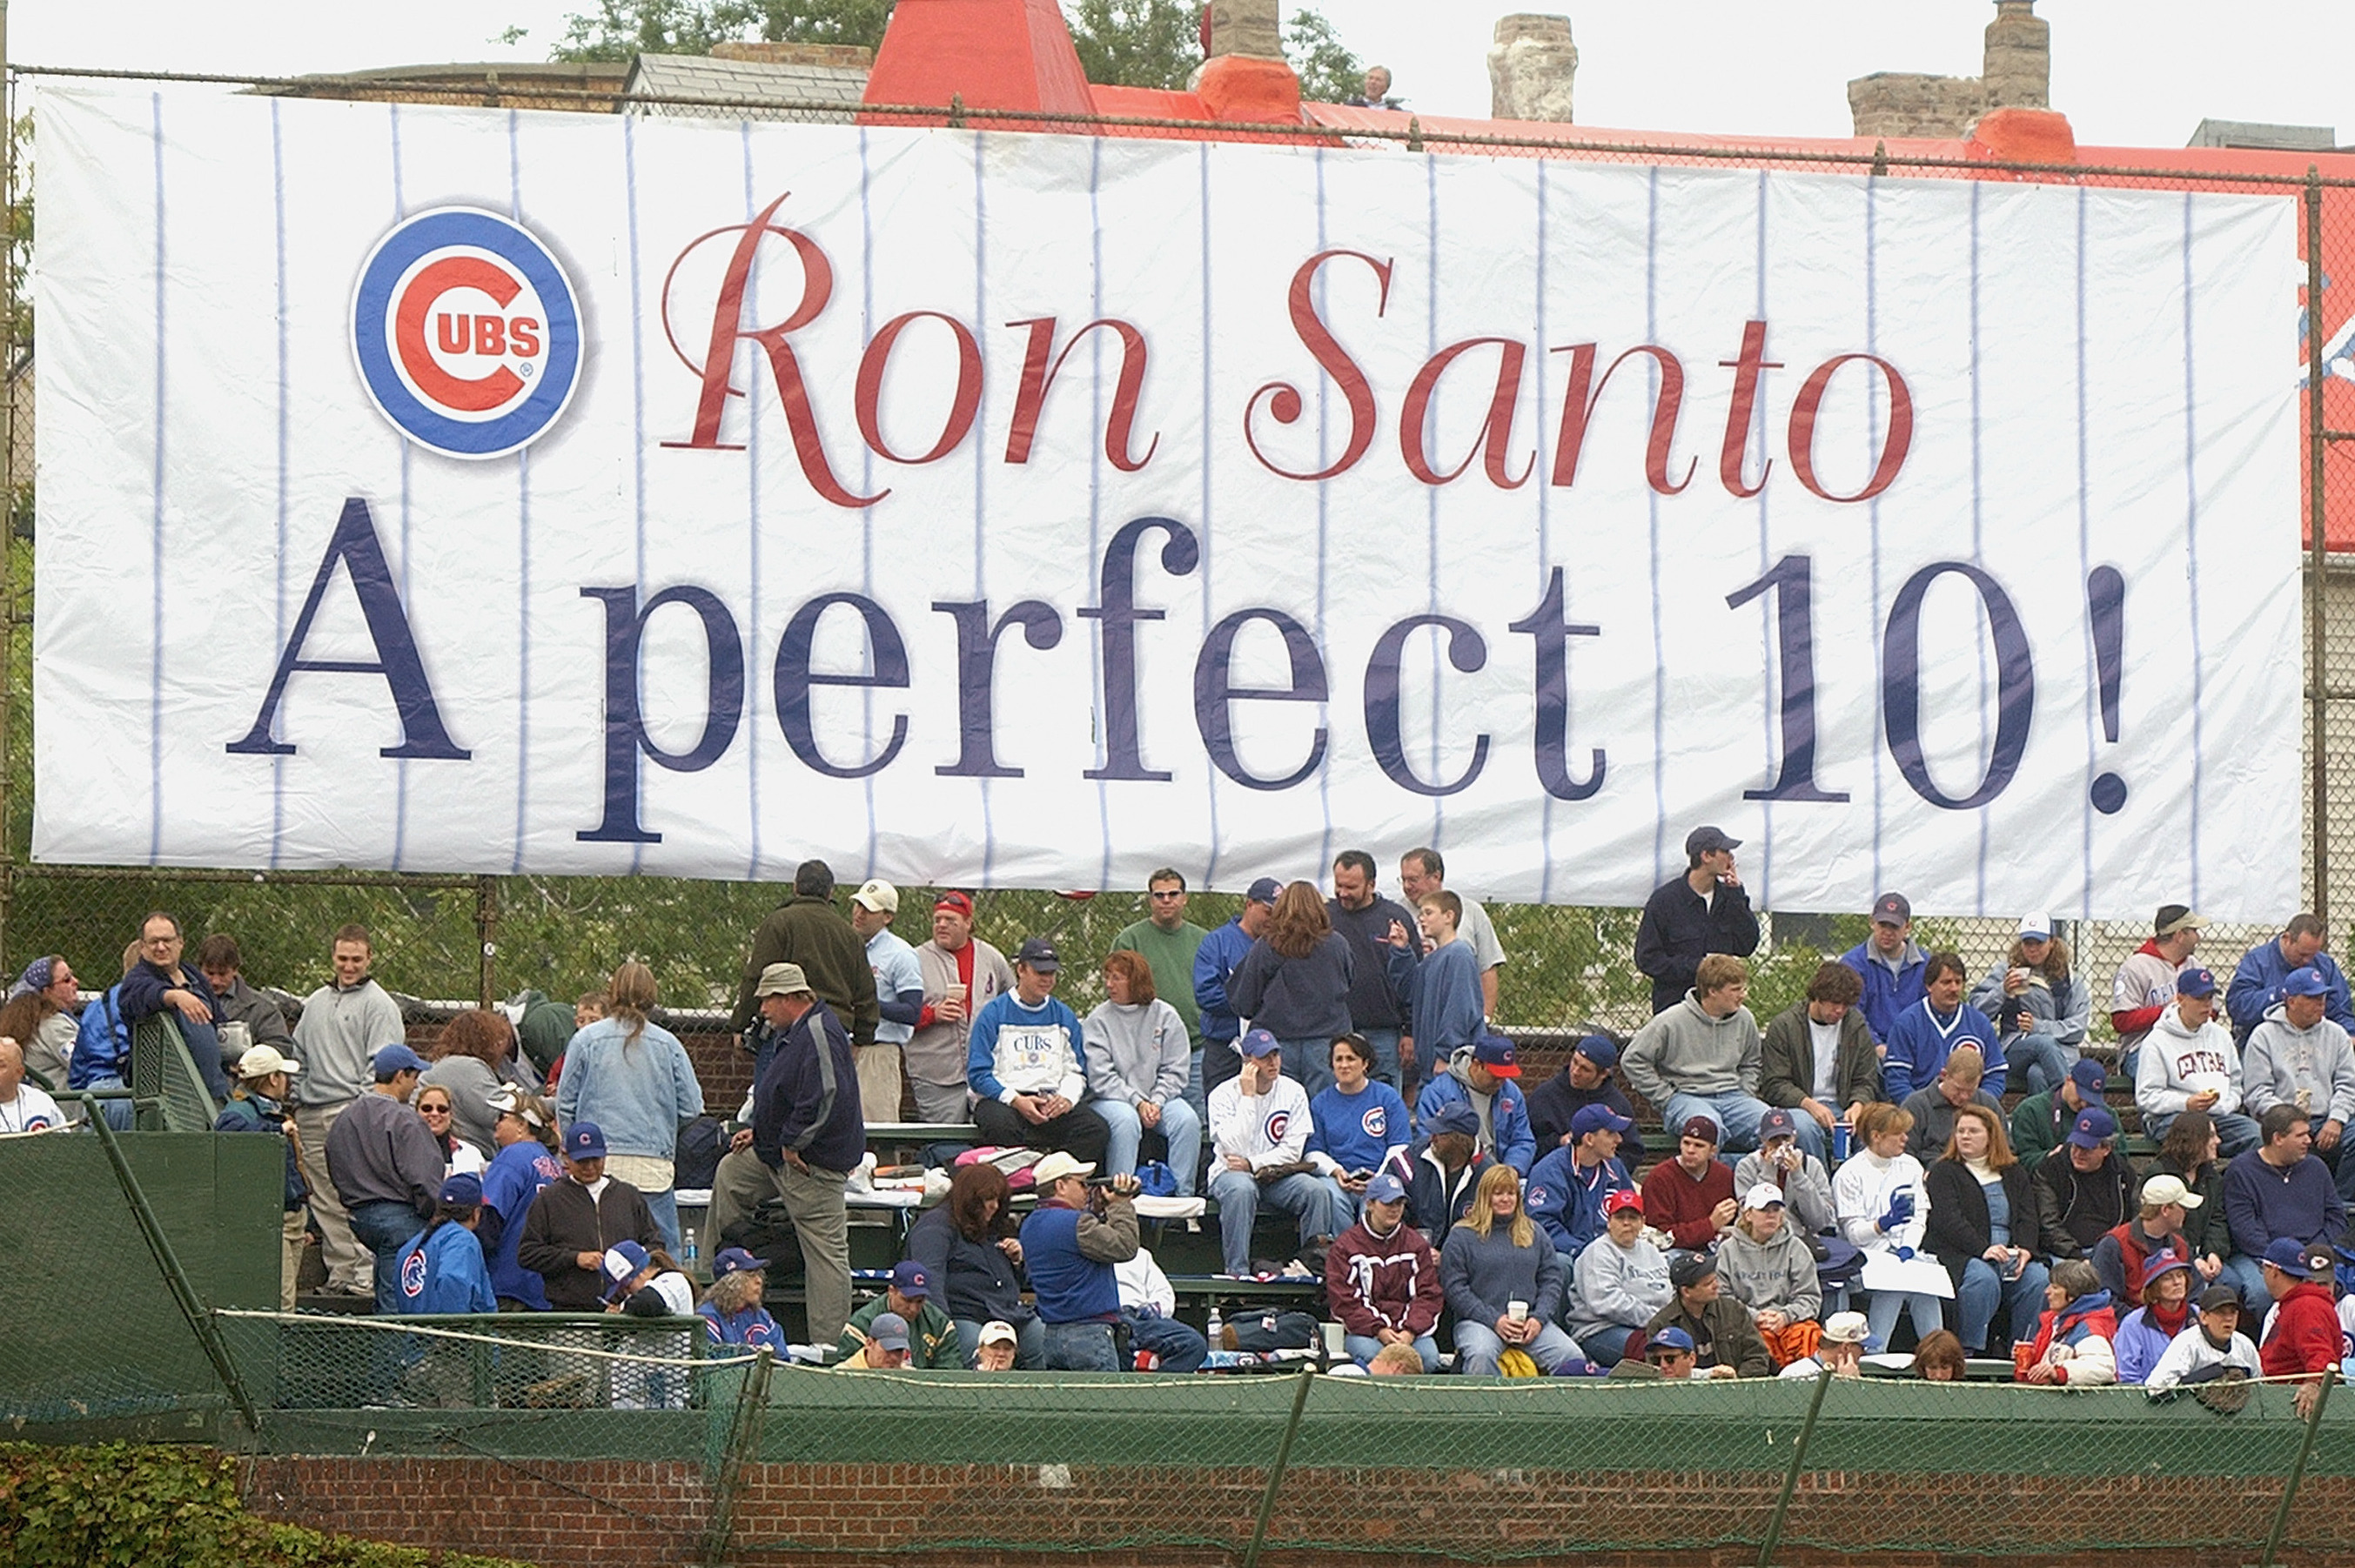 Santo debuts with five RBI in doubleheader for Cubs